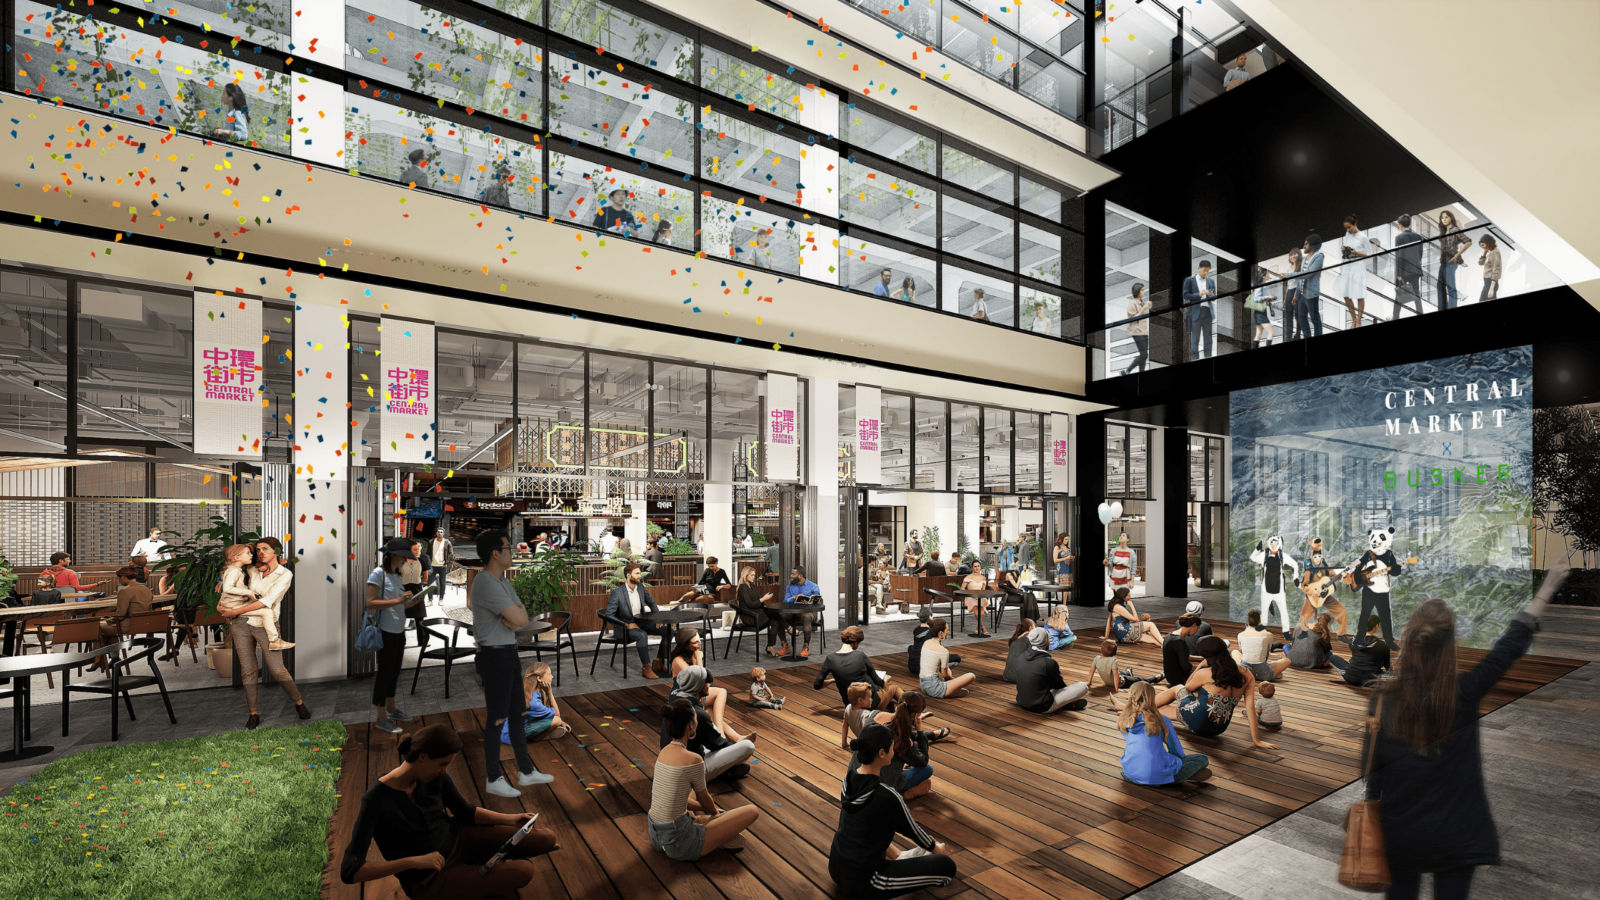 The Revitalised Central Market is Now Open – Here’s What to Expect